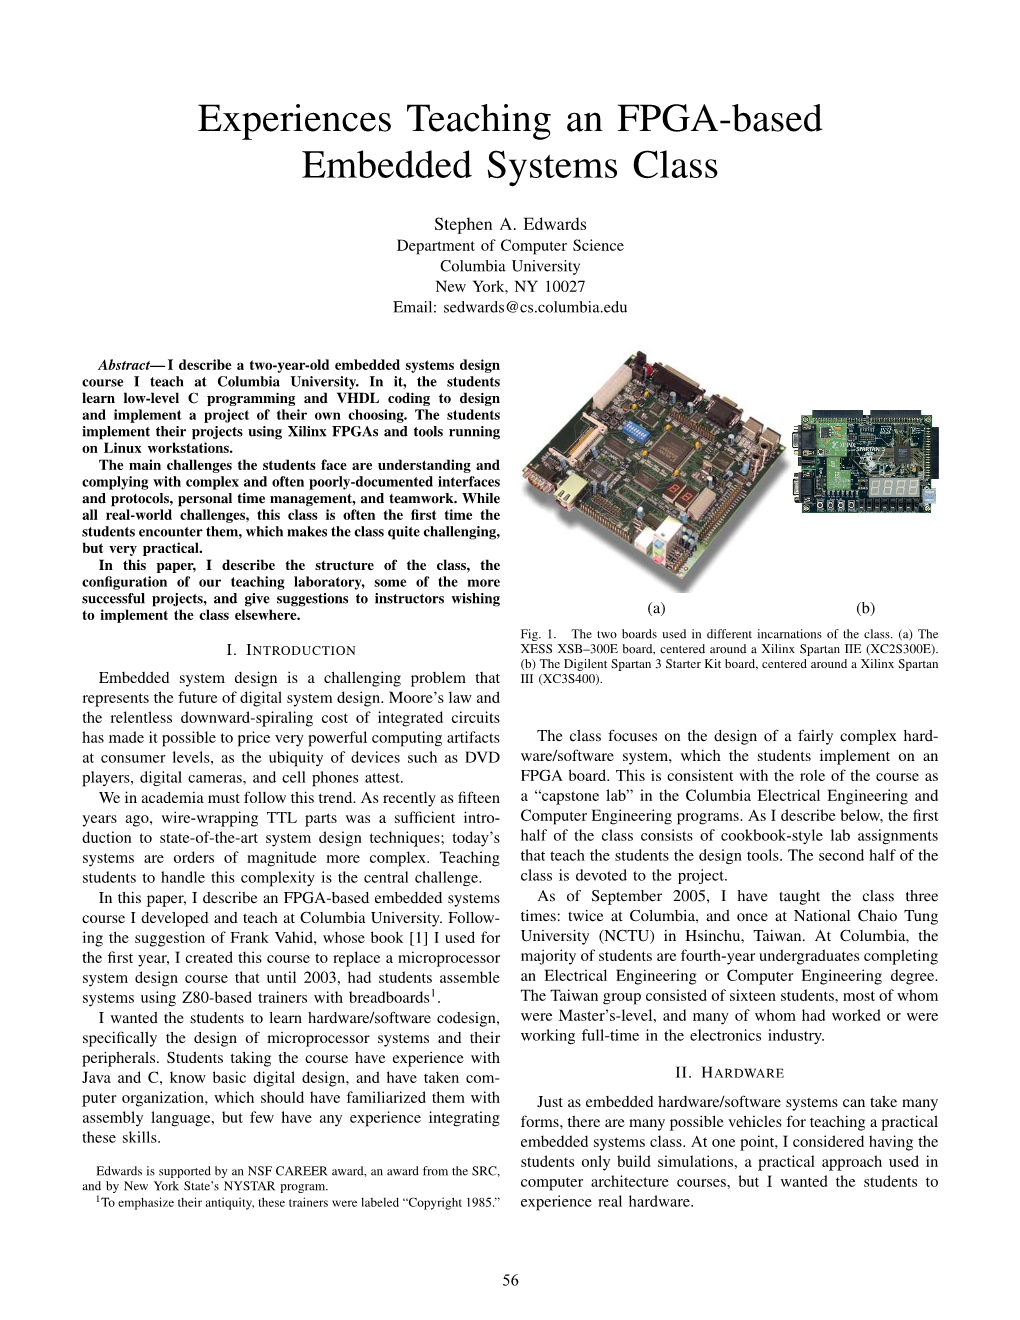 Experiences Teaching an FPGA-Based Embedded Systems Class